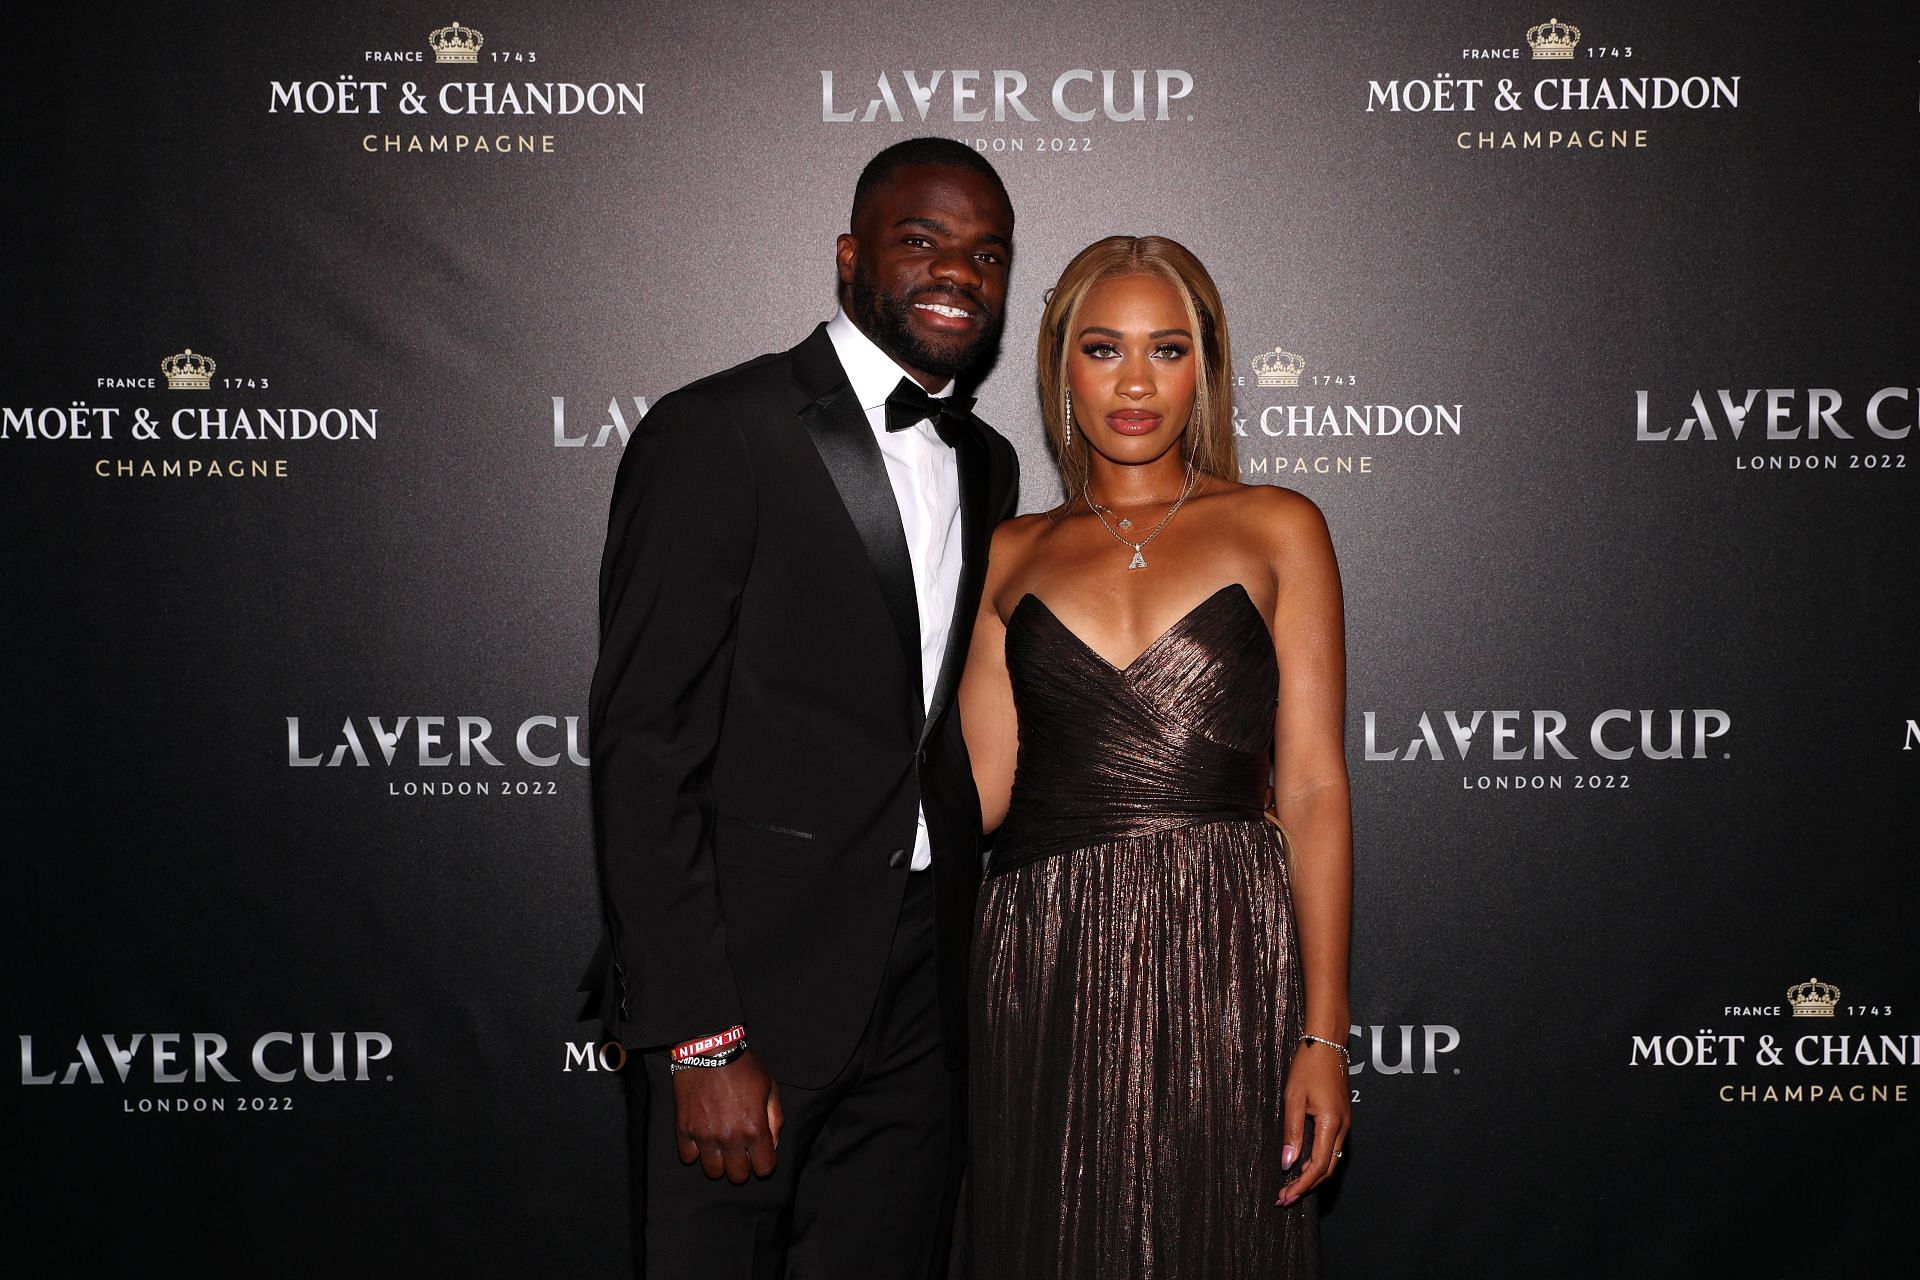 Frances Tiafoe and Ayan Broomfield have been dating since 2015